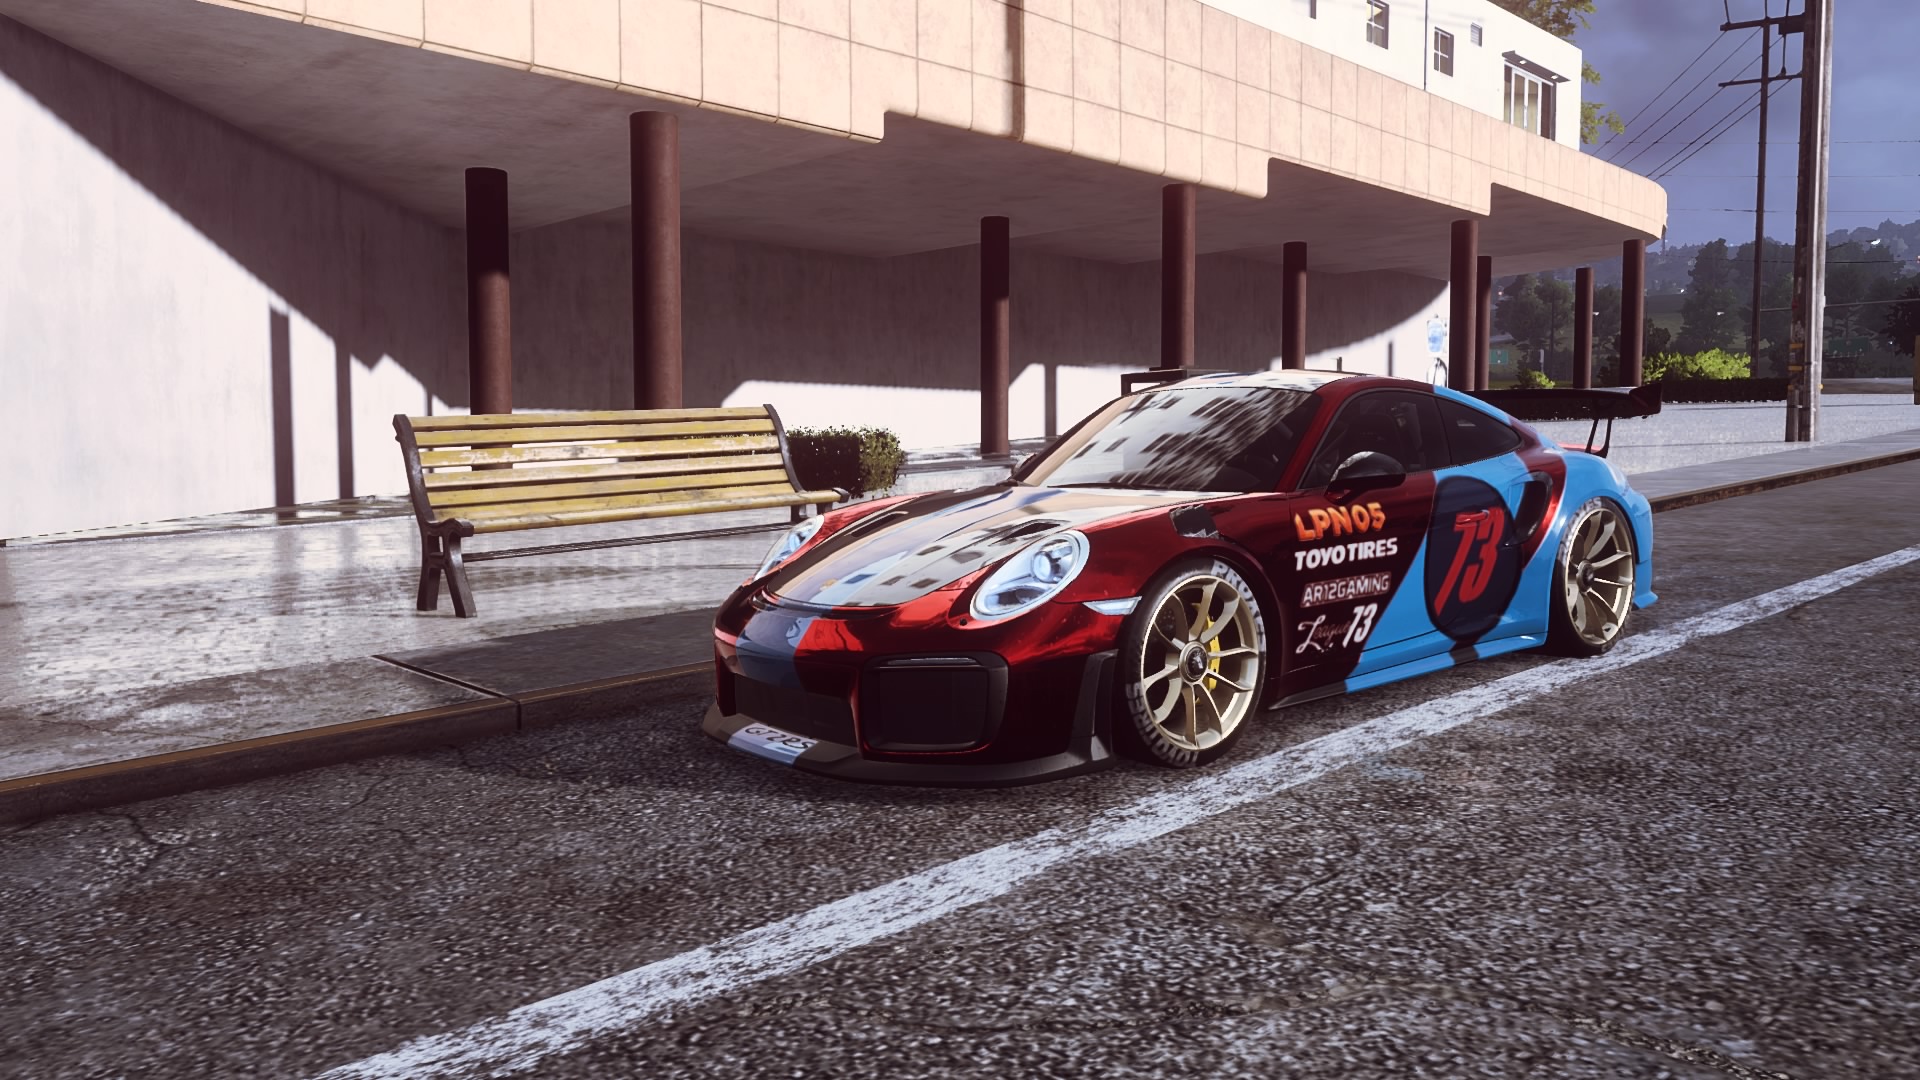 General 1920x1080 car Need for Speed: Heat bench gold wheels PlayStation 4 vehicle frontal view video games video game art screen shot building road sky power lines wheels headlights porsche gt2 rs